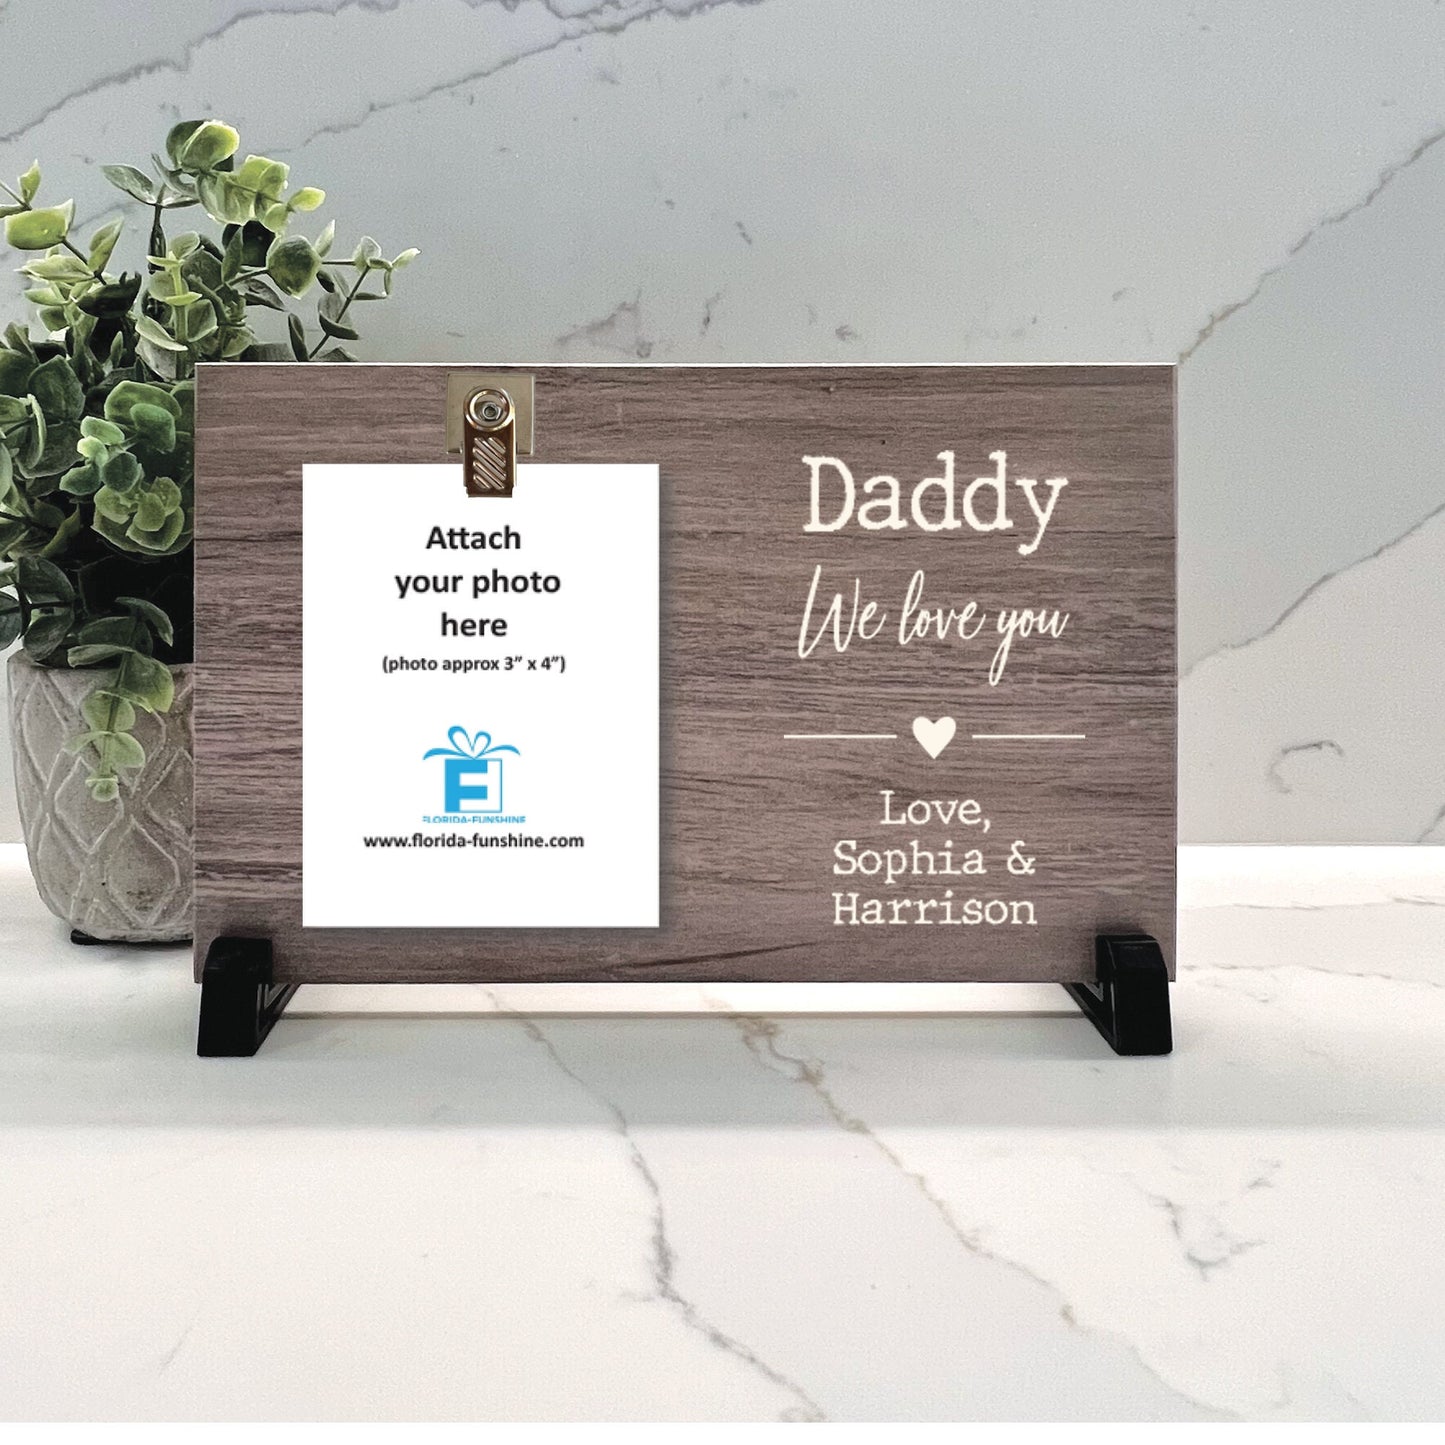 Daddy Frame, We love you Frame, Personalized Frame, Personalized Gift for Daddy, Father, Personalized Wood Frame from kids, Wood choice